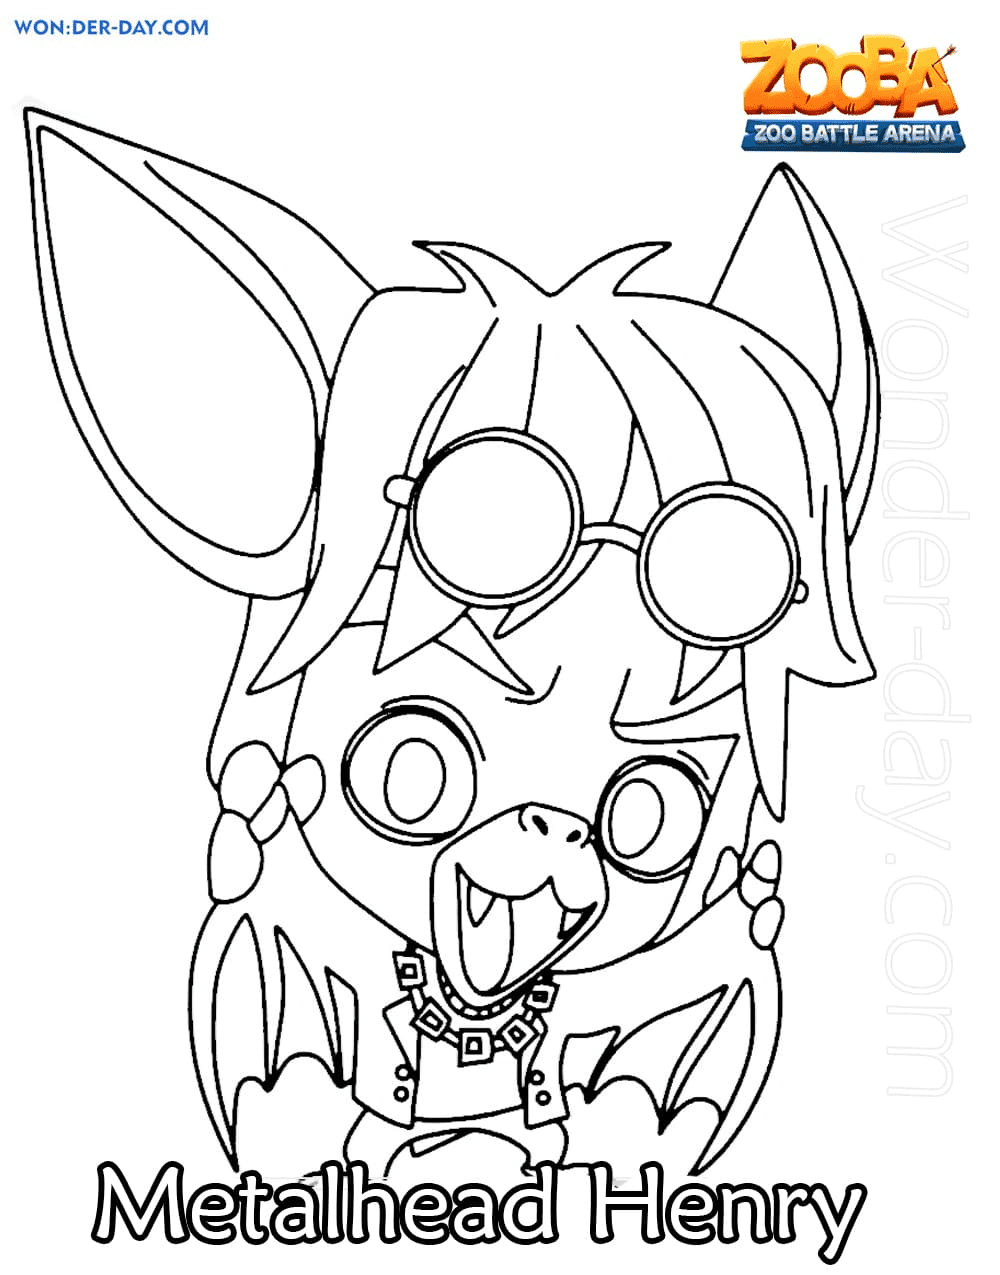 Metalhead Henry Zooba Coloring Page